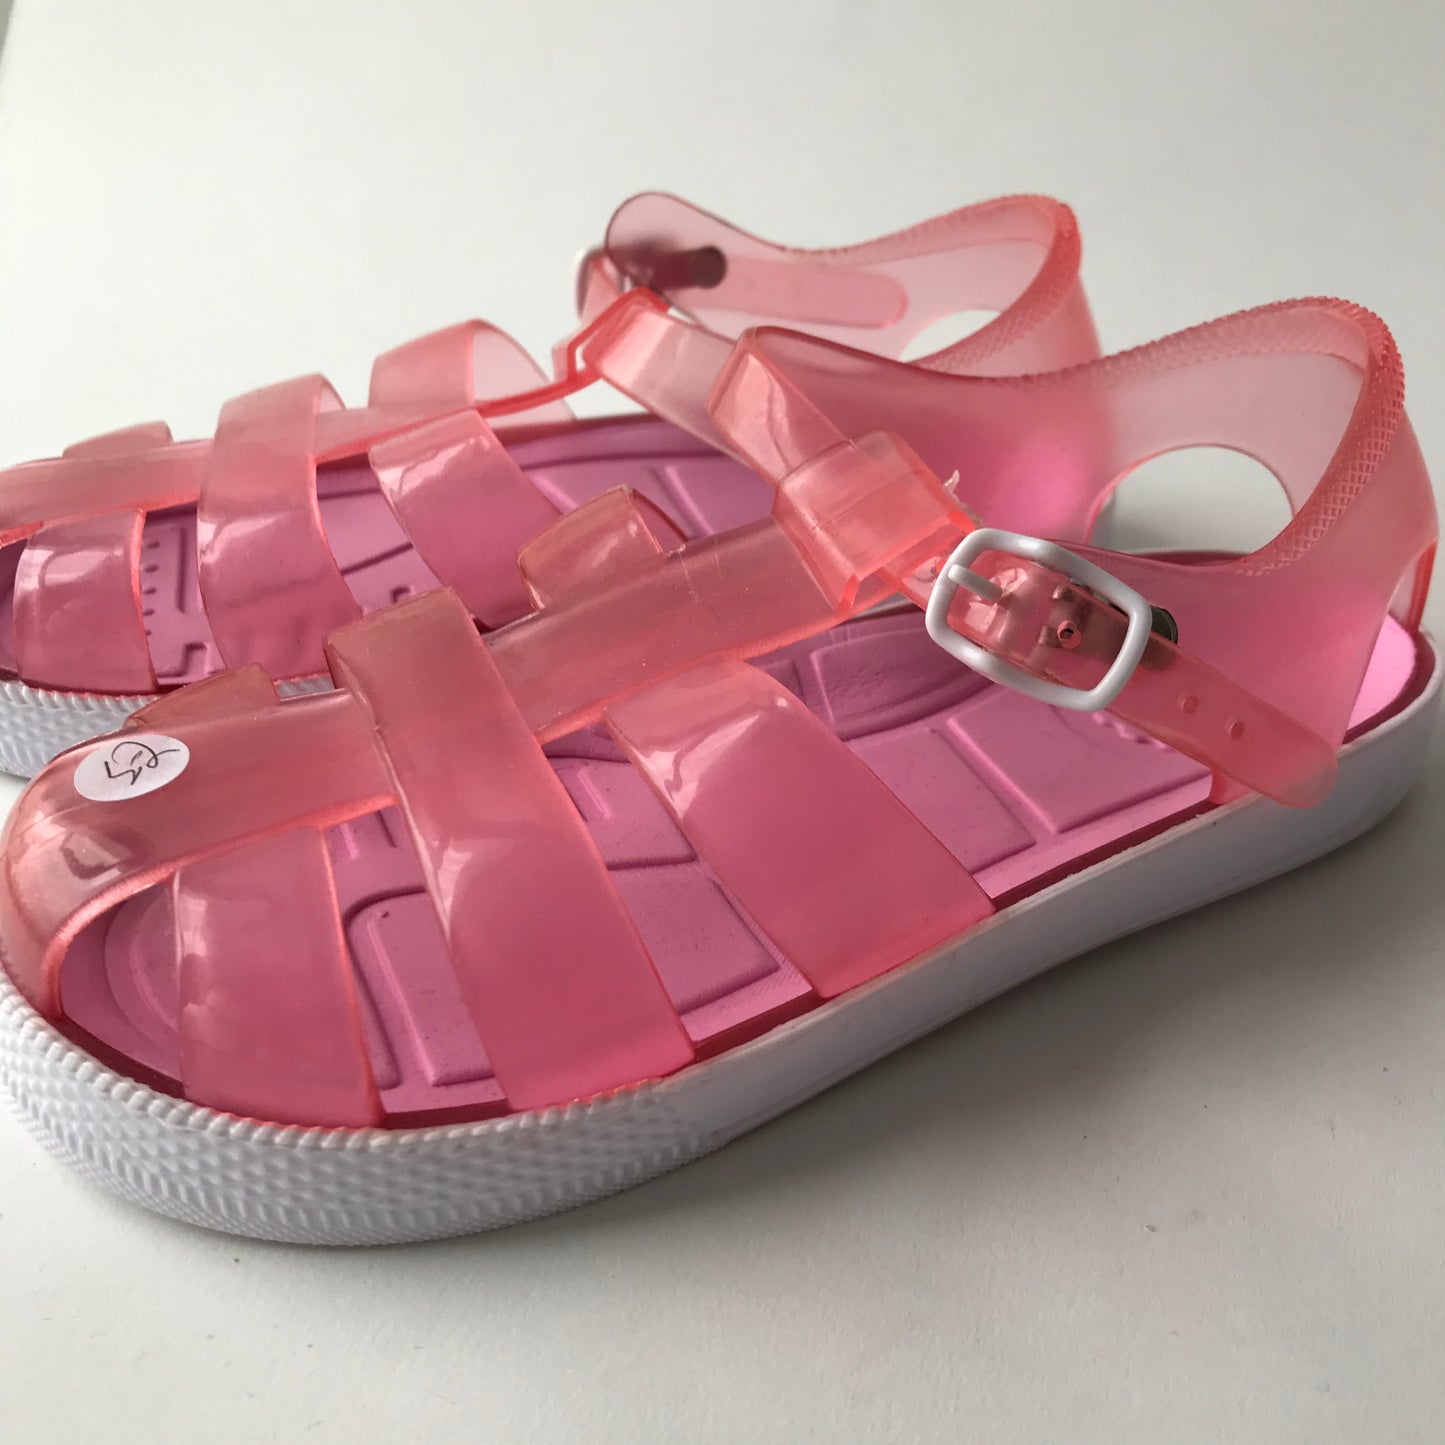 Pink and White Jelly Sandals Shoe Size 12 (jr)